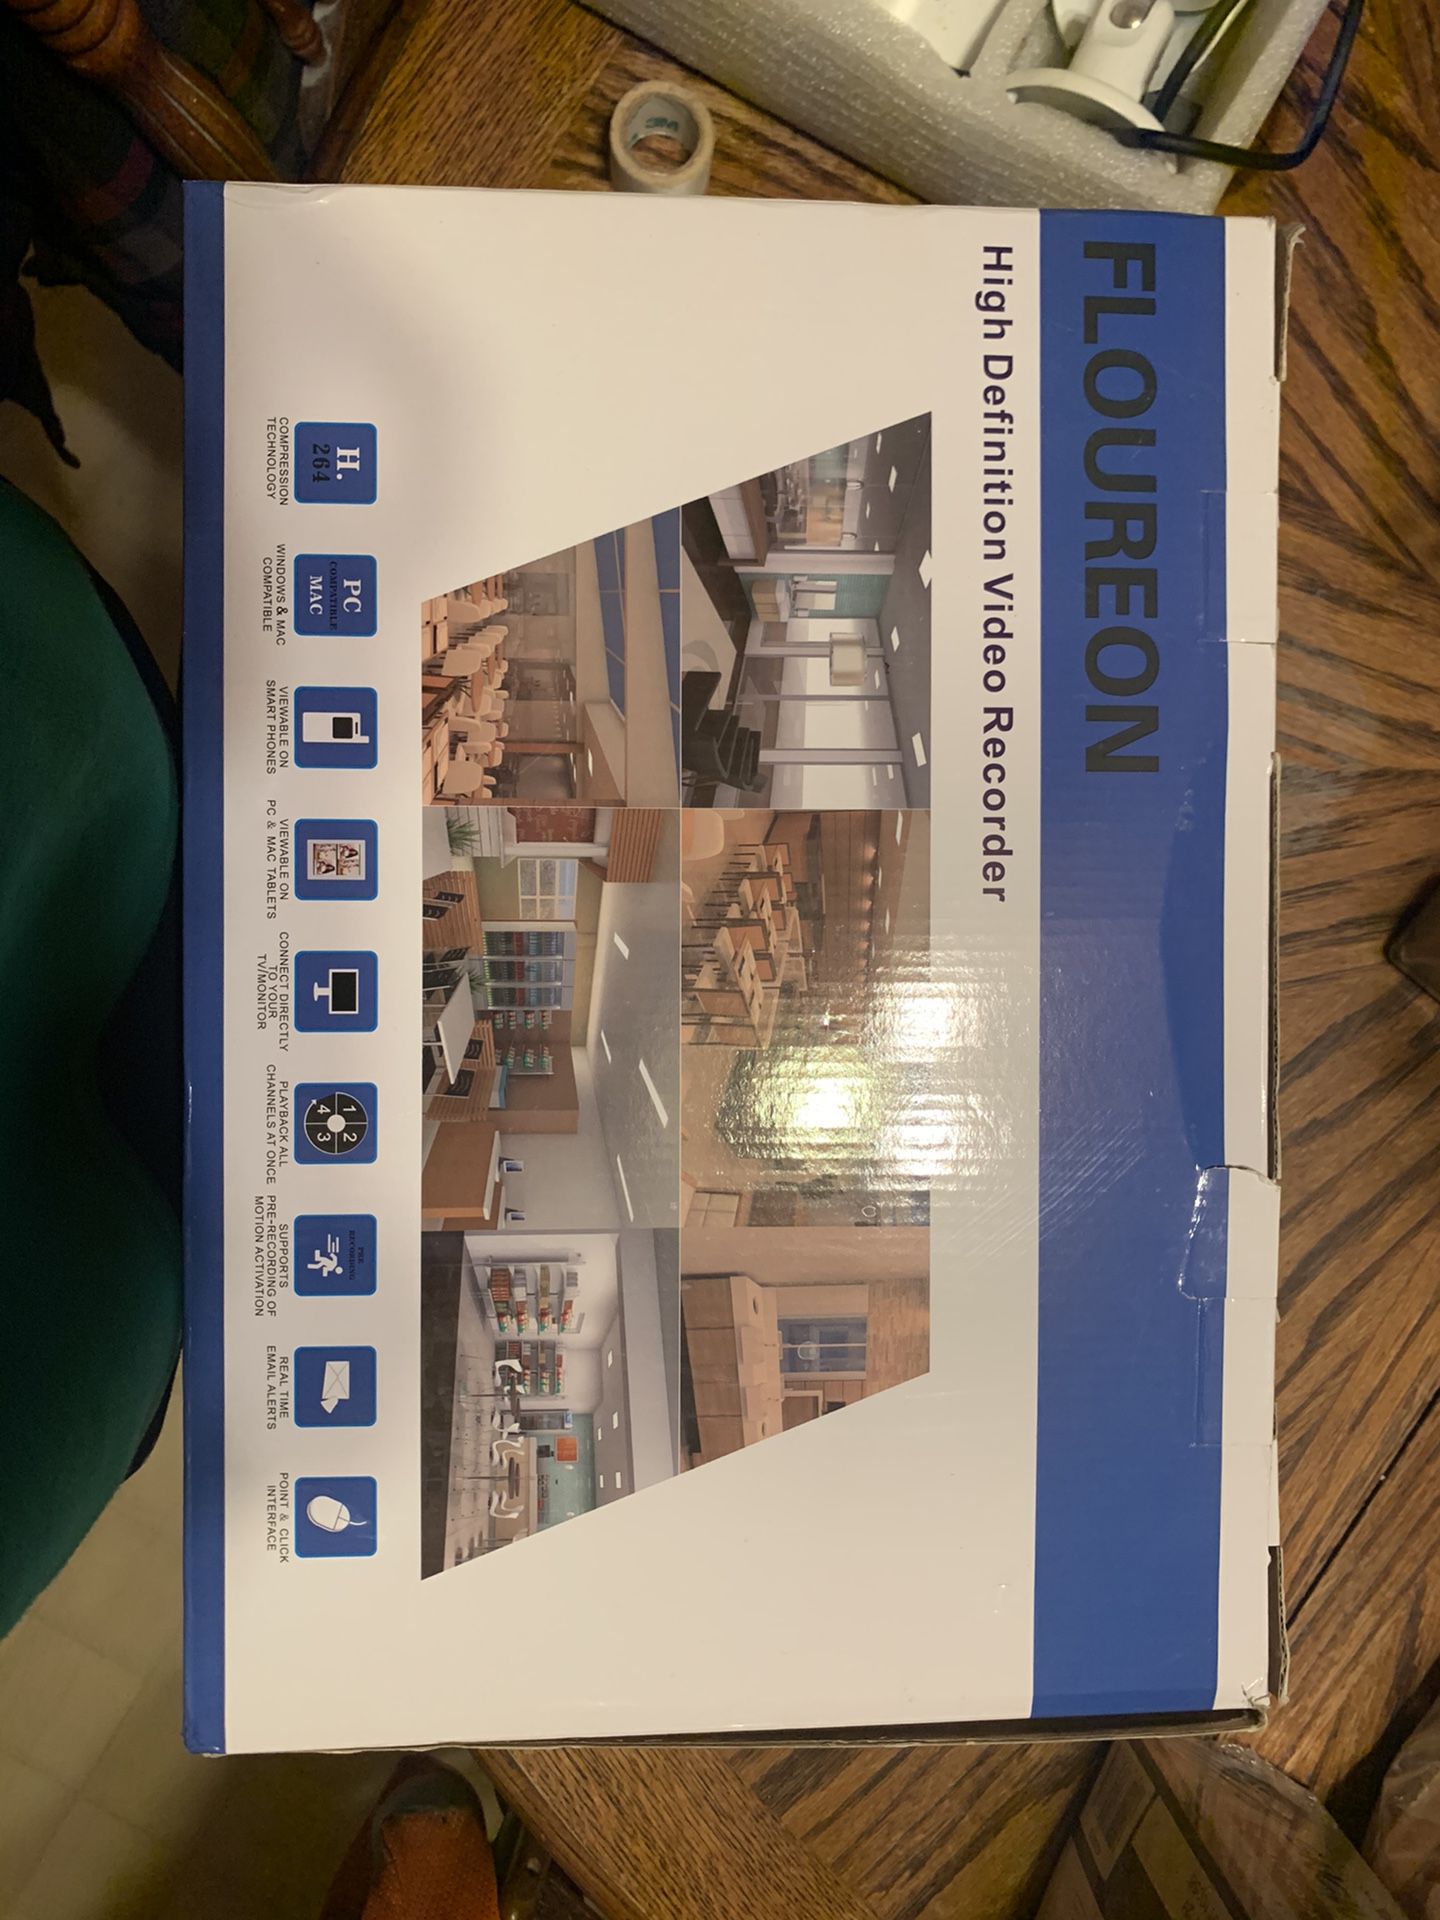 floureon home security camera in box with extra cameras